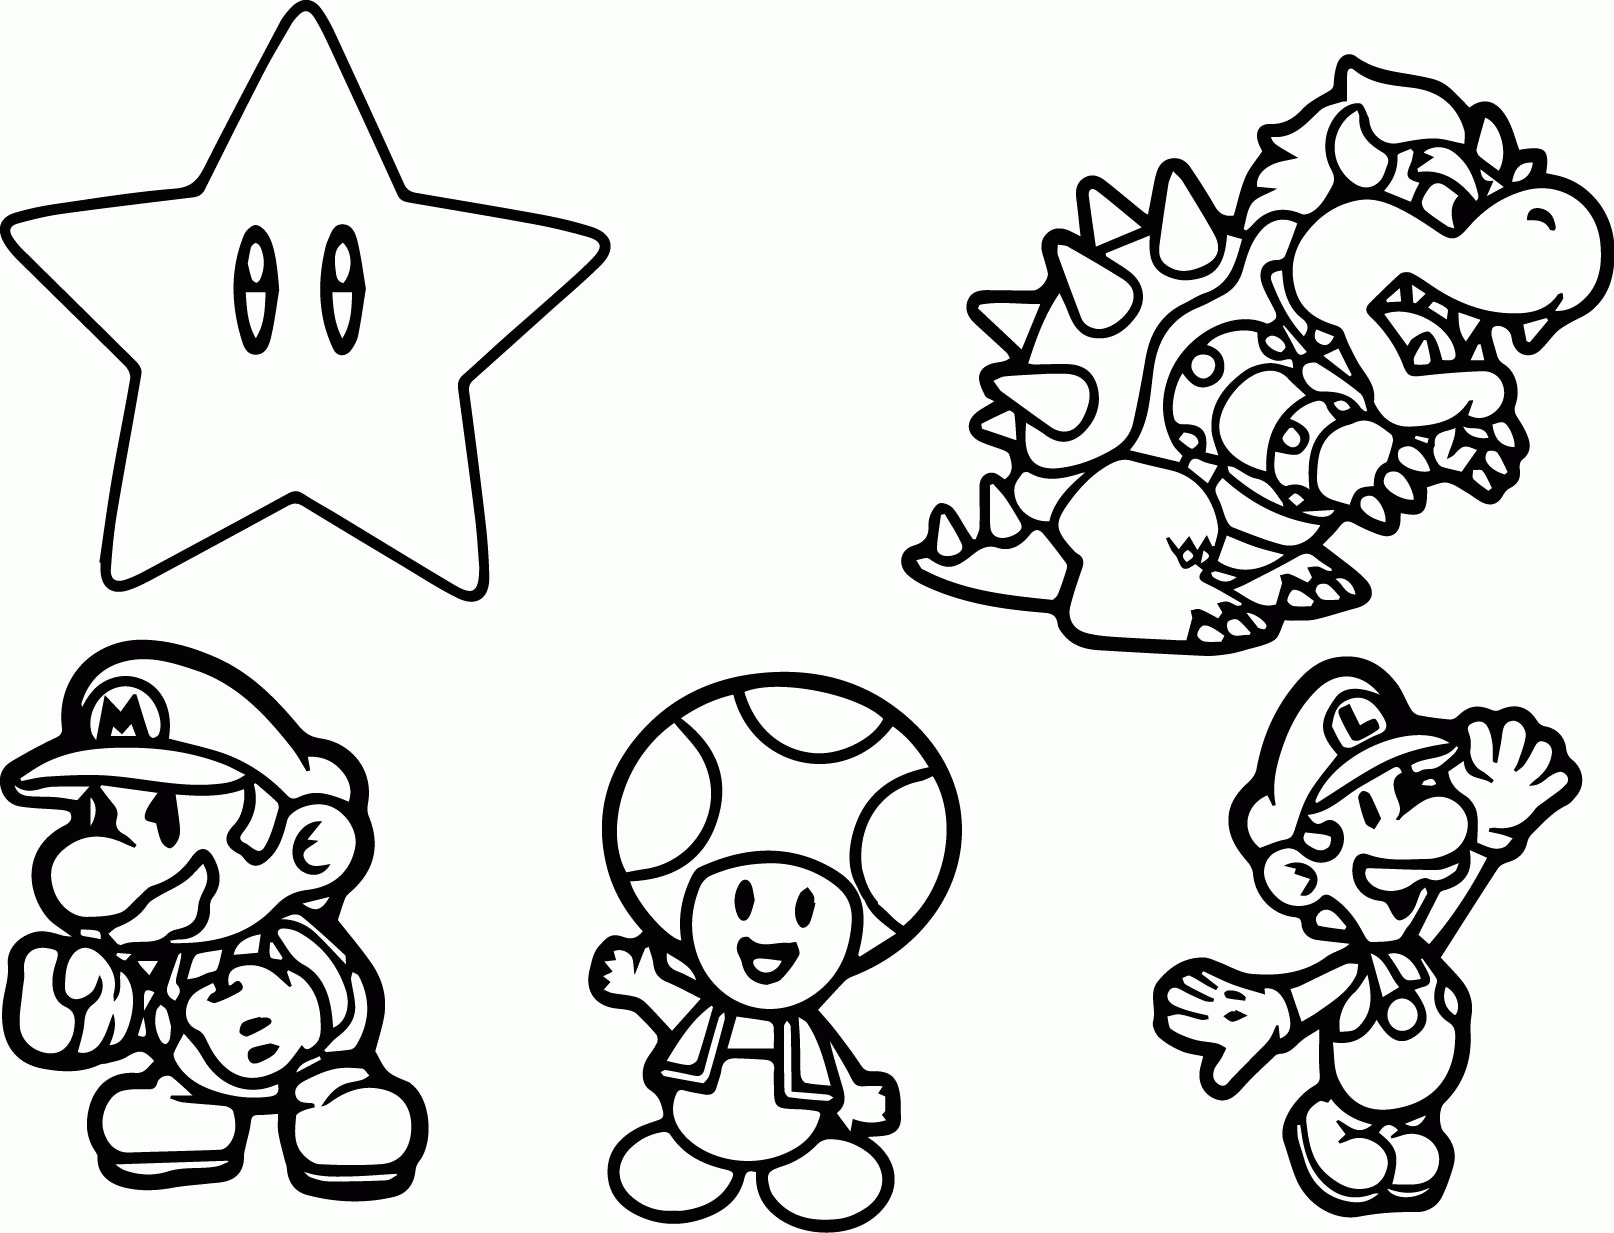 Mario Bad Guys Coloring Pages Printable Coloring Pages